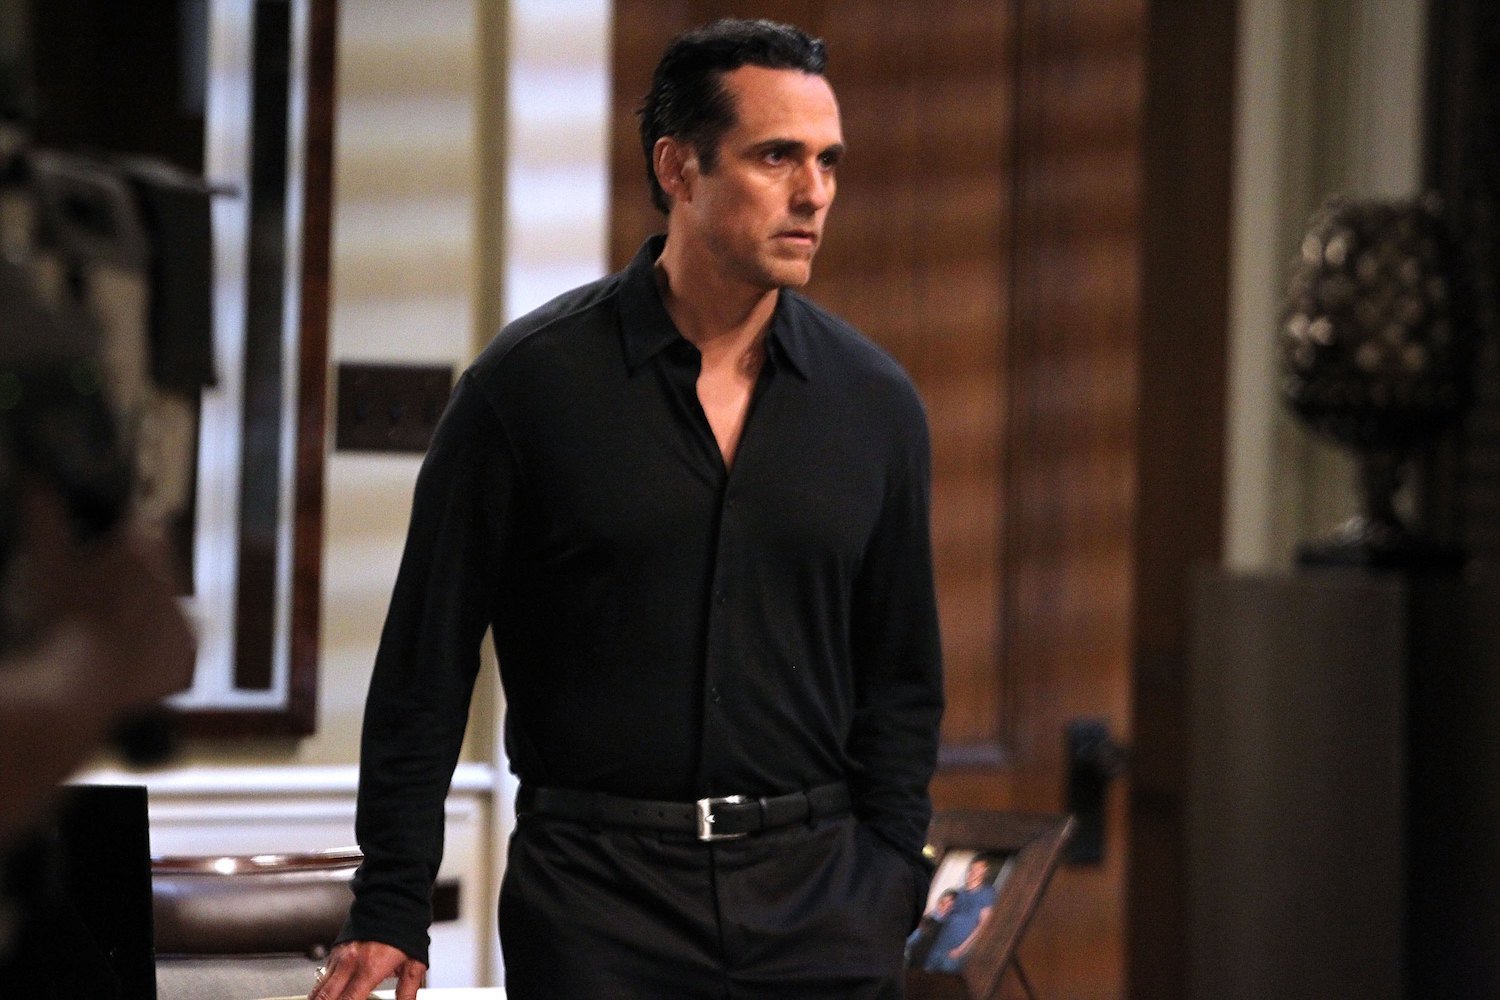 ‘General Hospital’: Maurice Benard Shares His Mom’s Reaction to 1 Heartbreaking New Episode